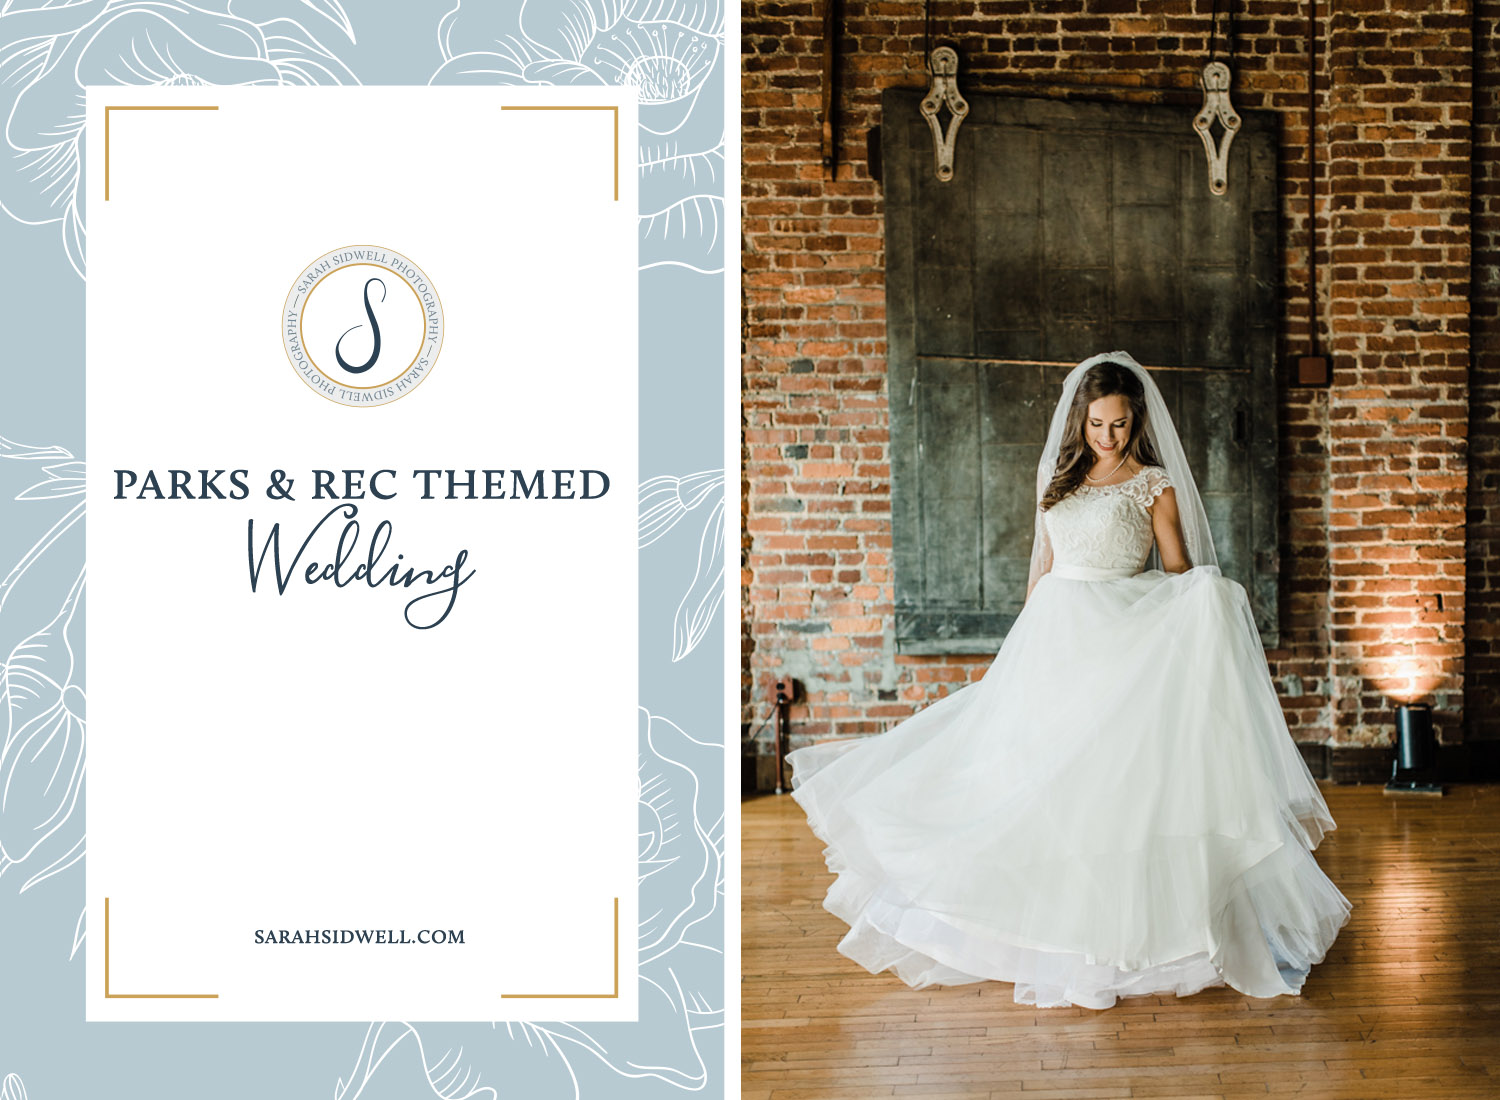 bride and groom plan a destination wedding in nashville tennessee with a parks and rec theme at the cannery one venue with franklin photographer.jpg